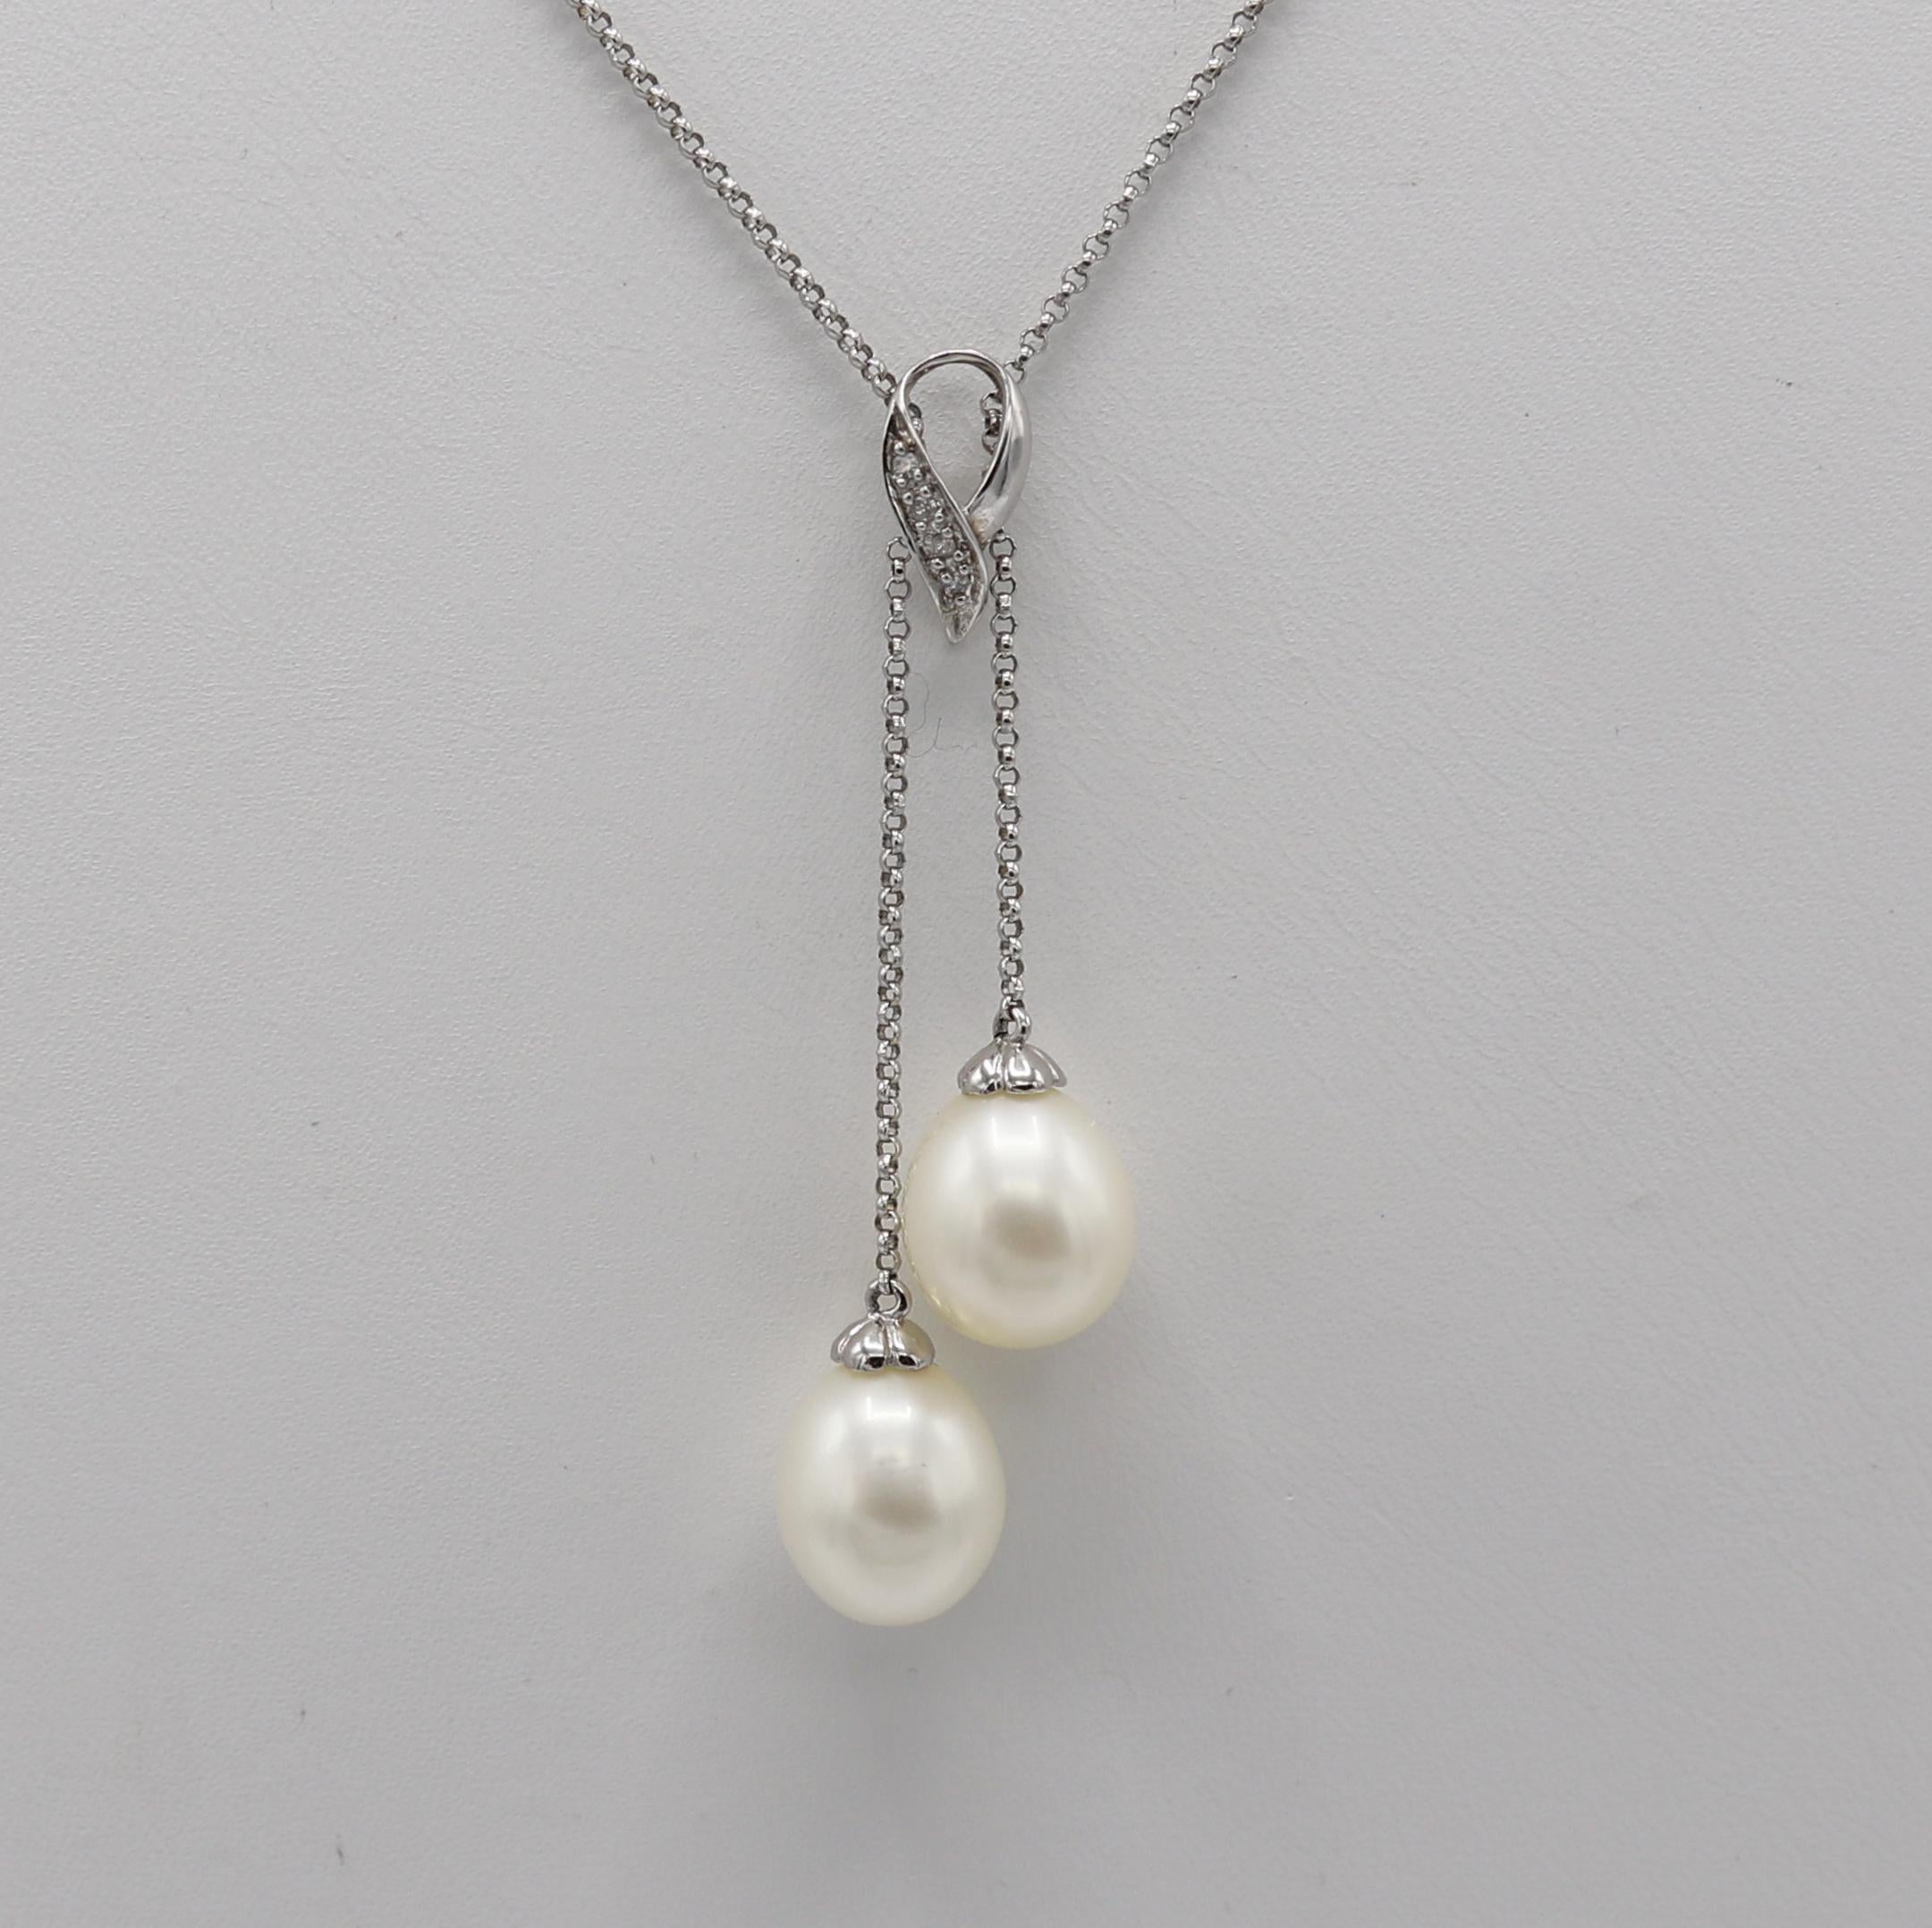 14 Karat White Gold Double Pearl & Natural Diamond Dangle Drop Necklace 
Metal: 14k white gold
Weight: 5.11 grams
Diamonds: .04 CTW H-I SI round natural diamonds
Drop: 2 inches
Chain: 17 inches
Pearls: 9 x 11mm
